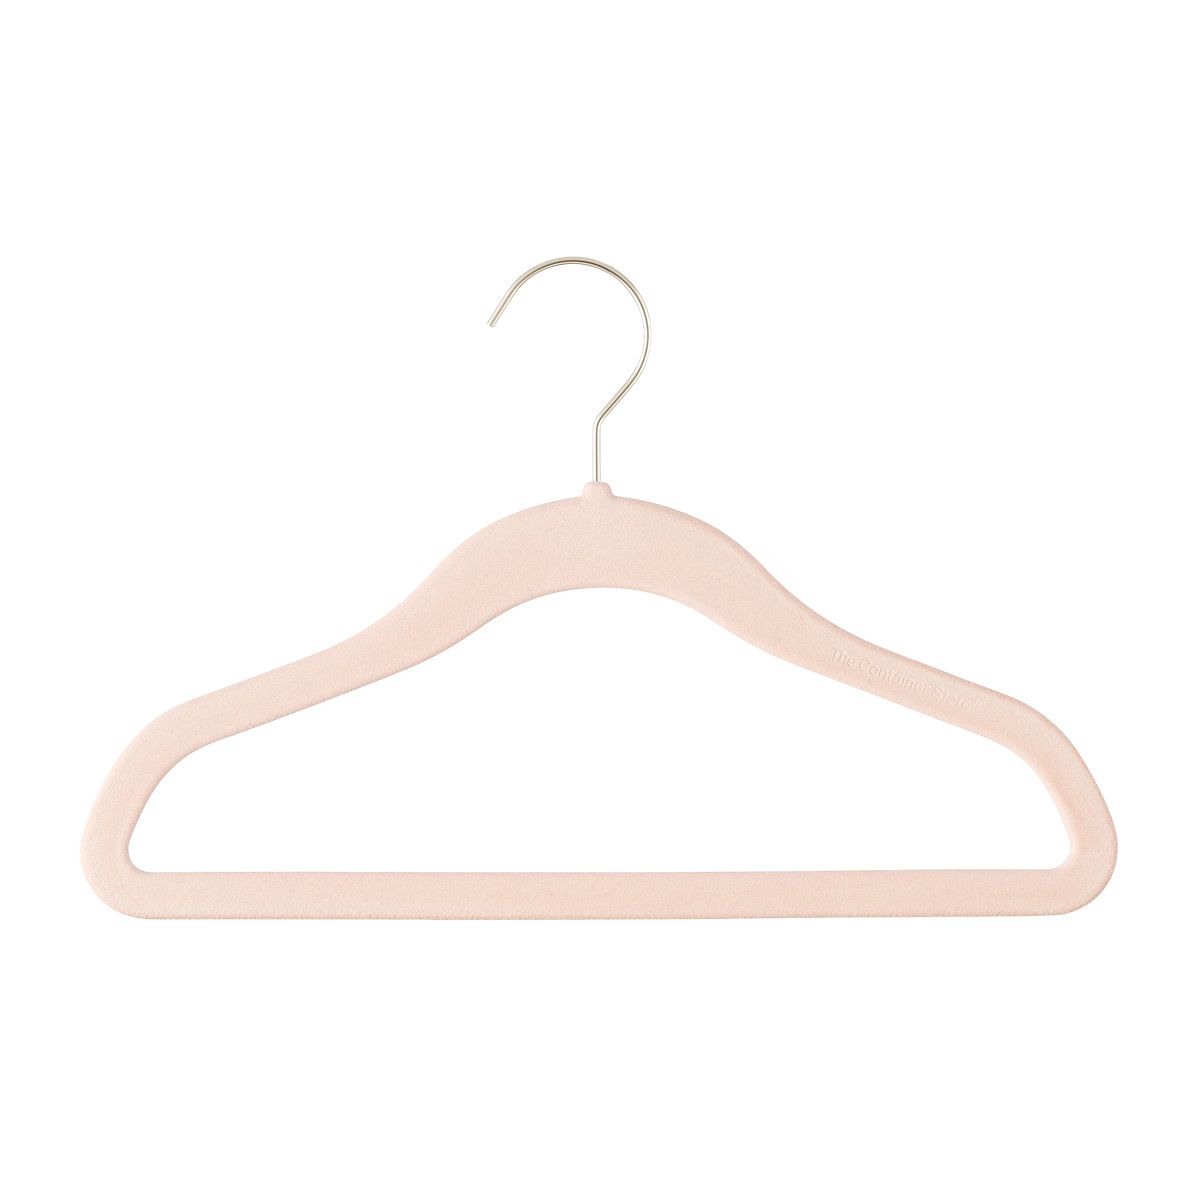 The Container Store Kid's Non-Slip Velvet Hangers | The Container Store